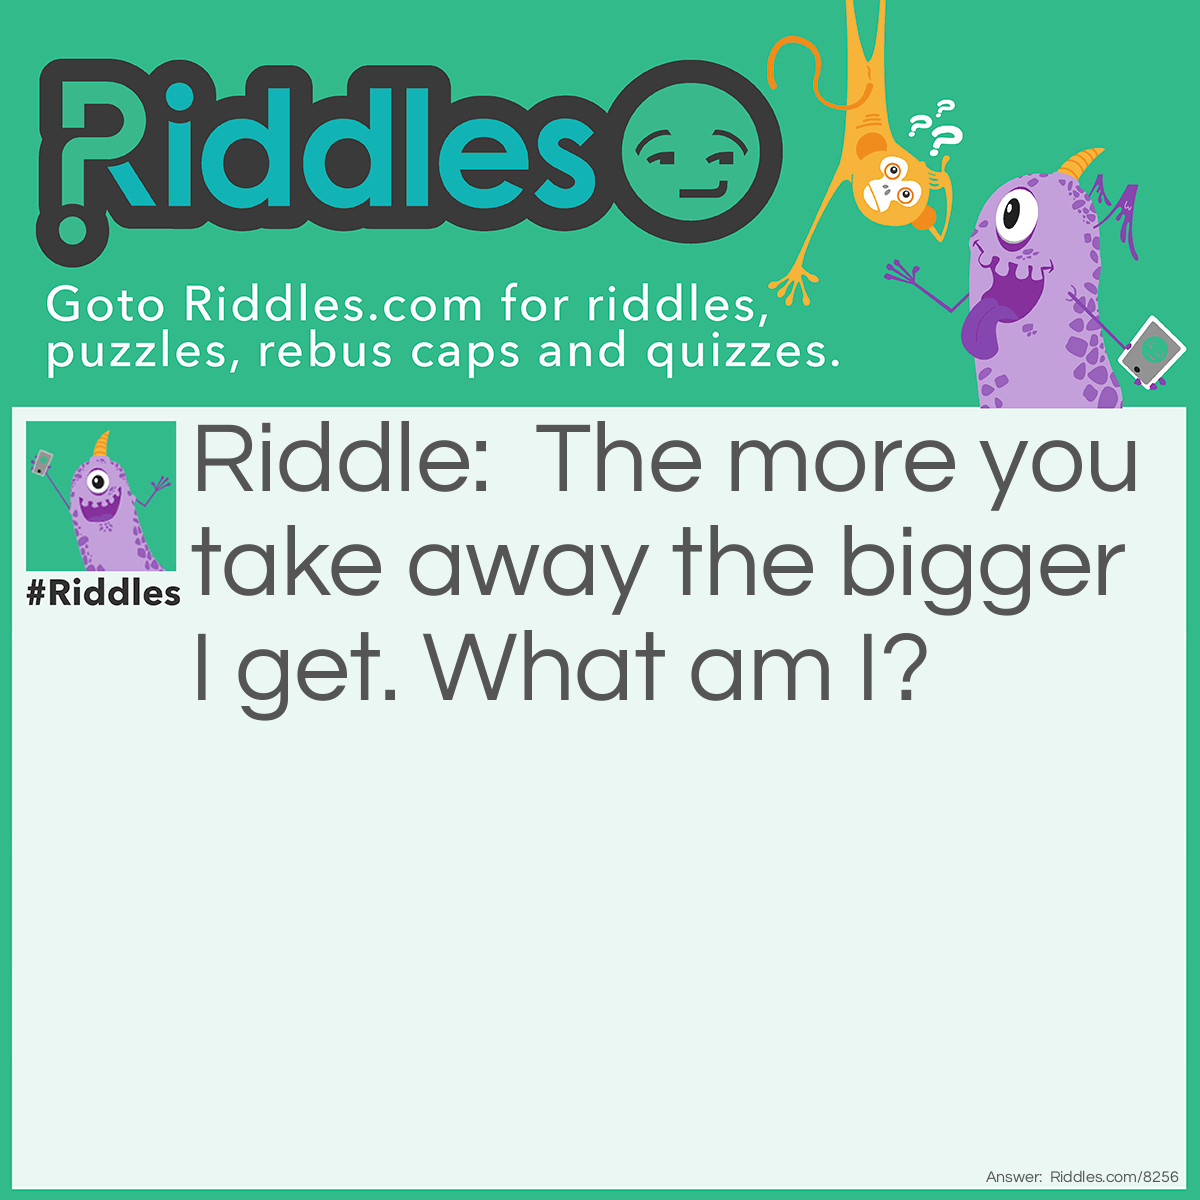 Riddle: The more you take away the bigger I get. What am I? Answer: A hole.